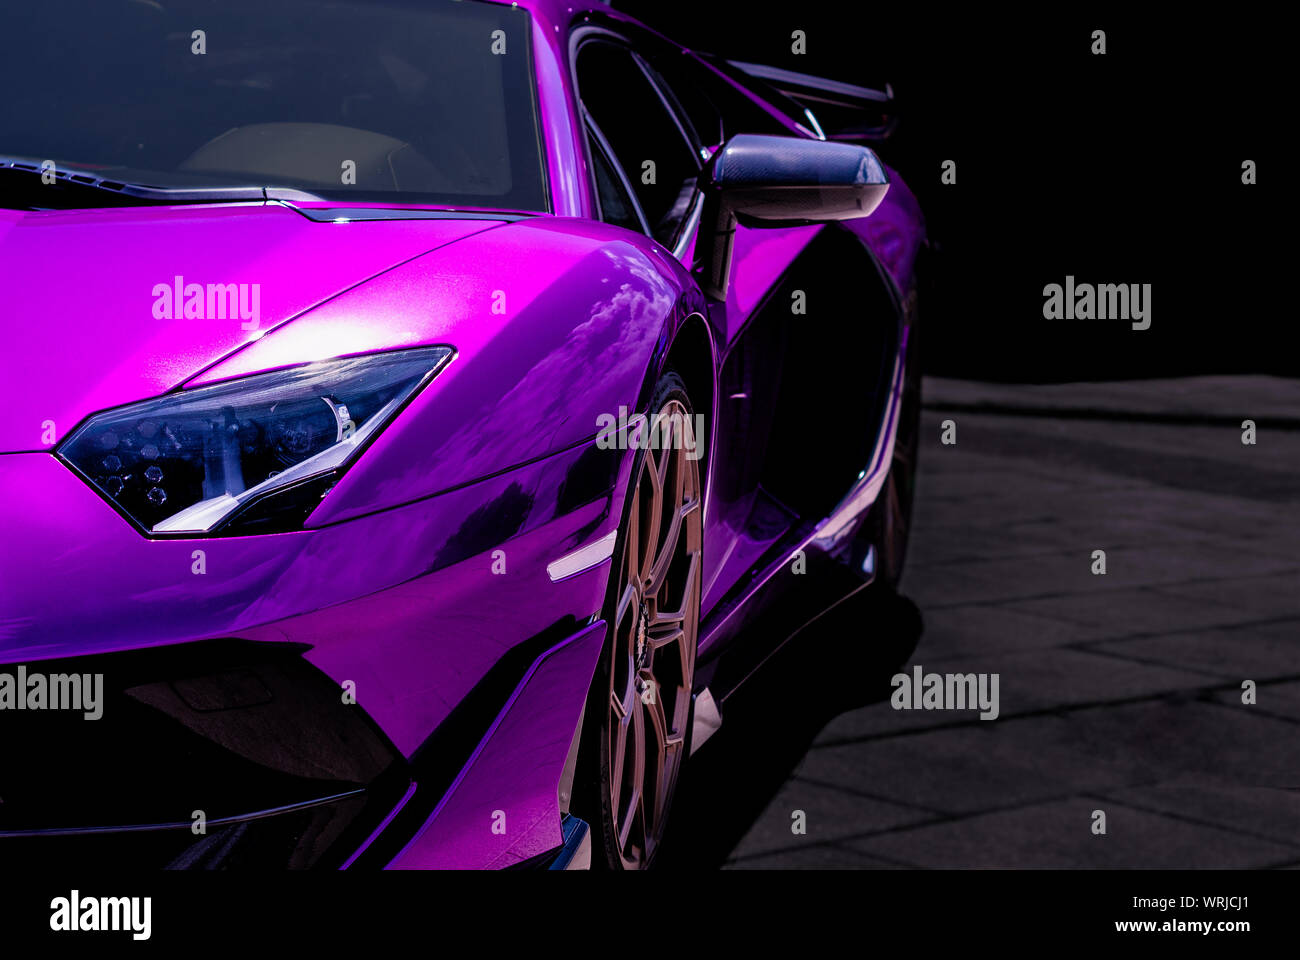 pink and purple supercar background Stock Photo